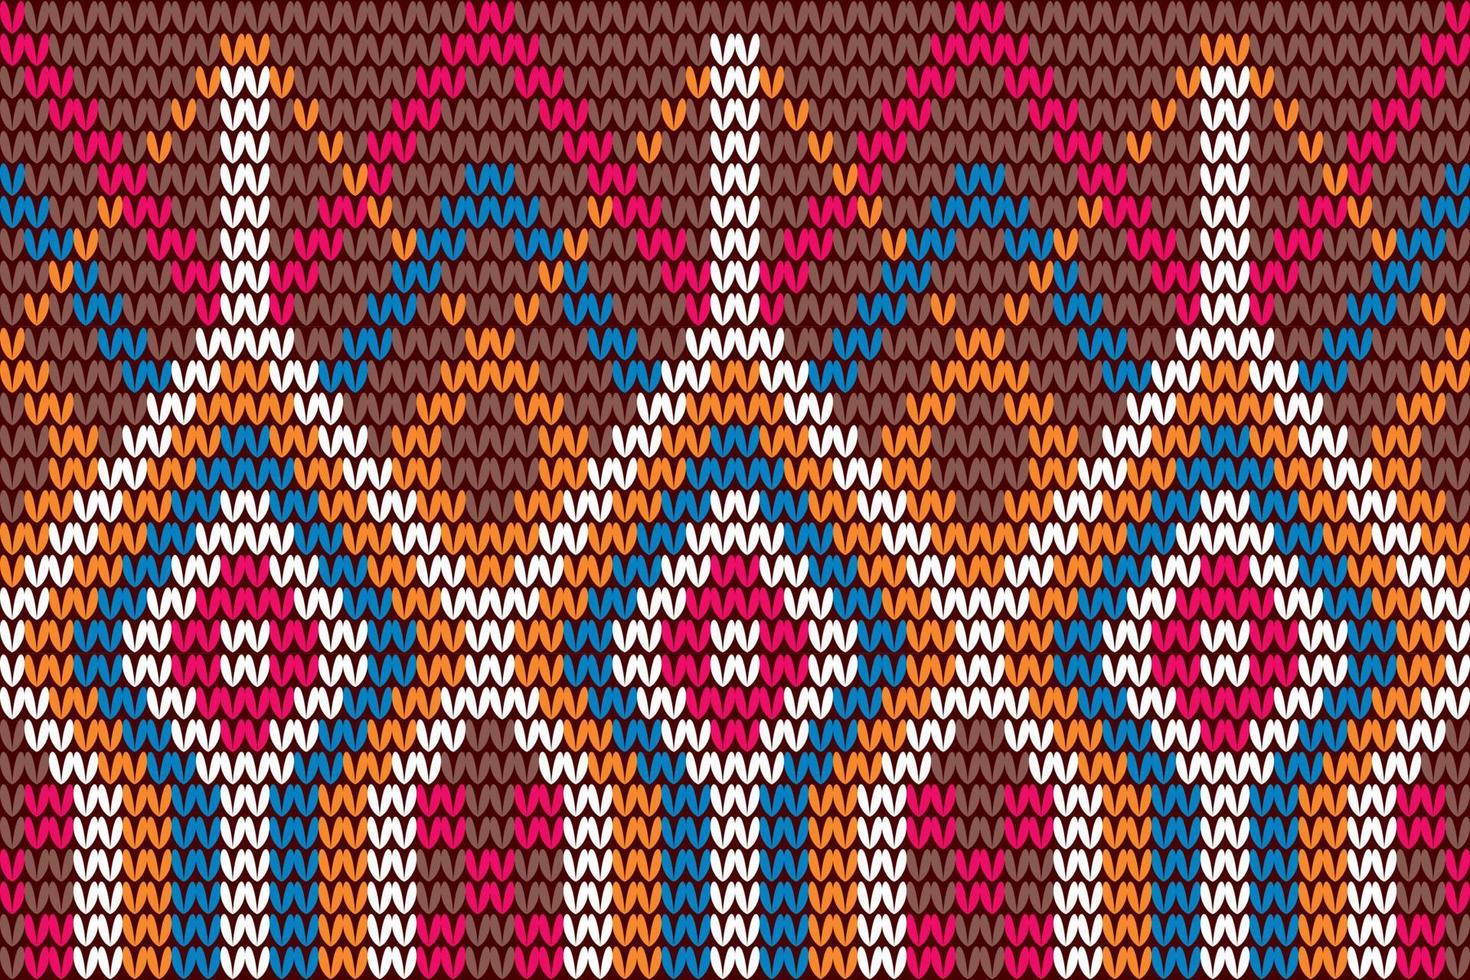 Ethnic seamless pattern, knitting texture design for wallpaper, background, fabric, curtain, carpet, clothing, and wrapping. vector